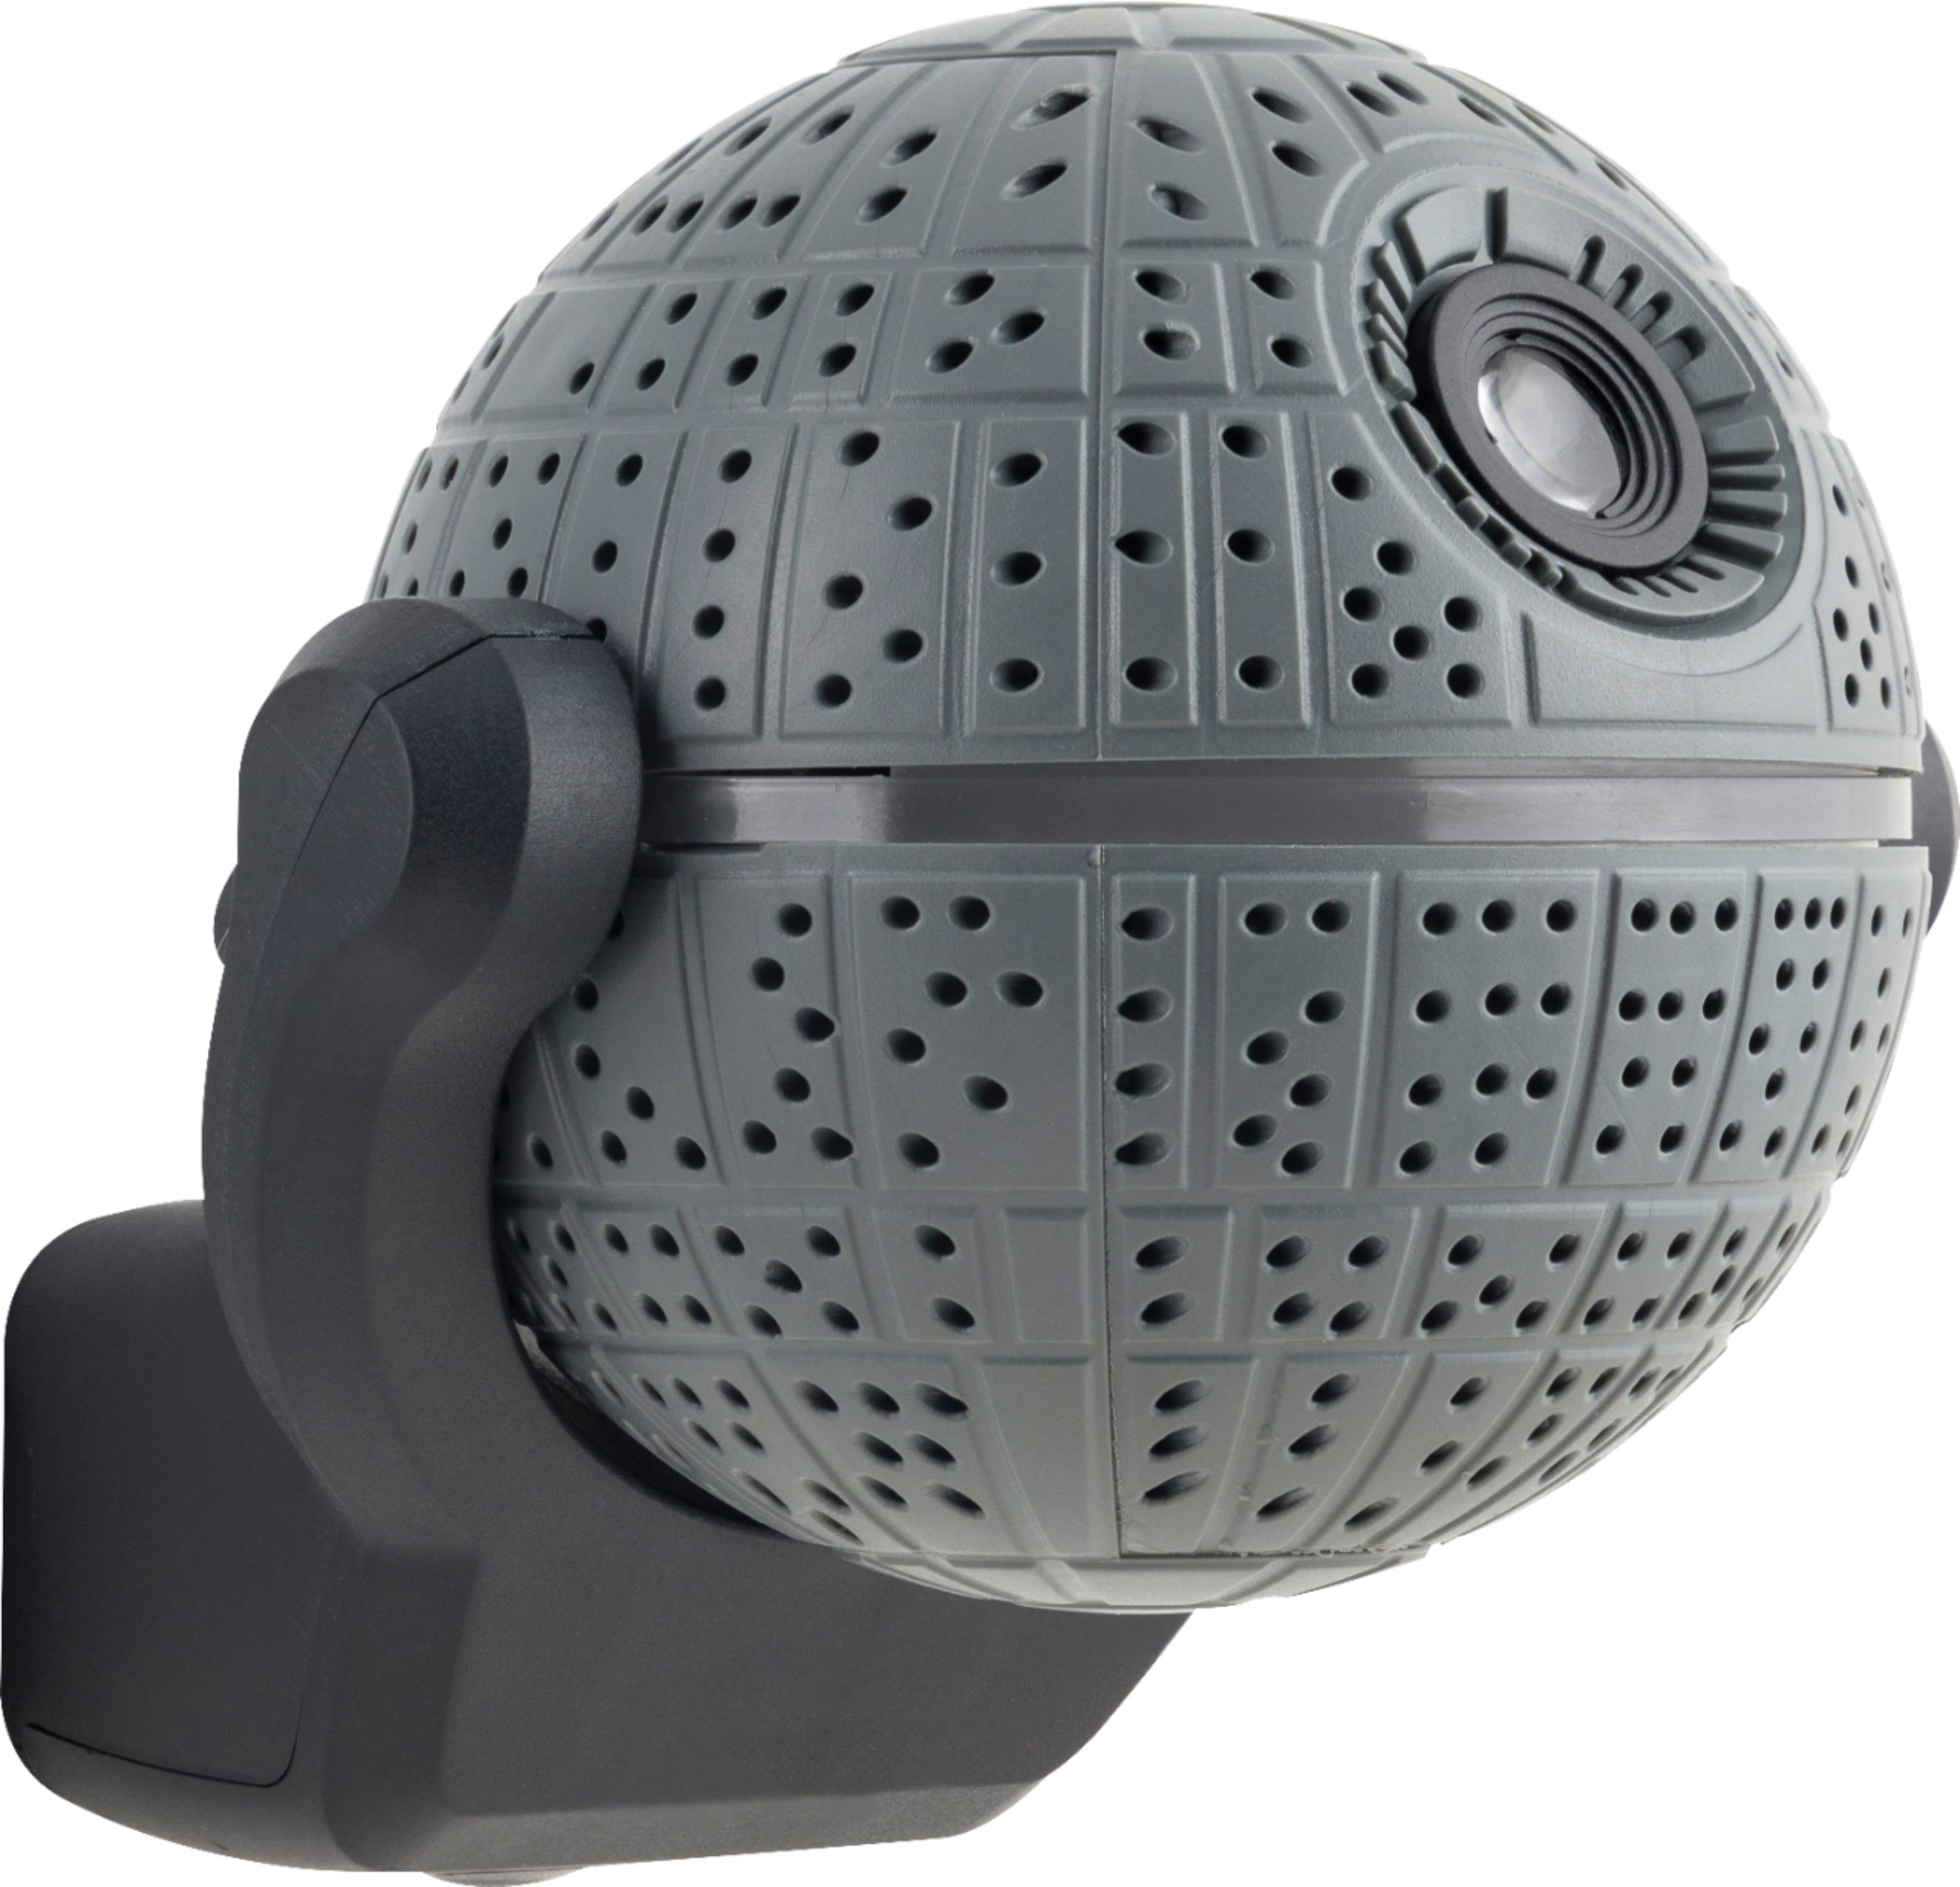 Angle View: Projectables - Star Wars Death Star LED Automatic Night Light - Gray